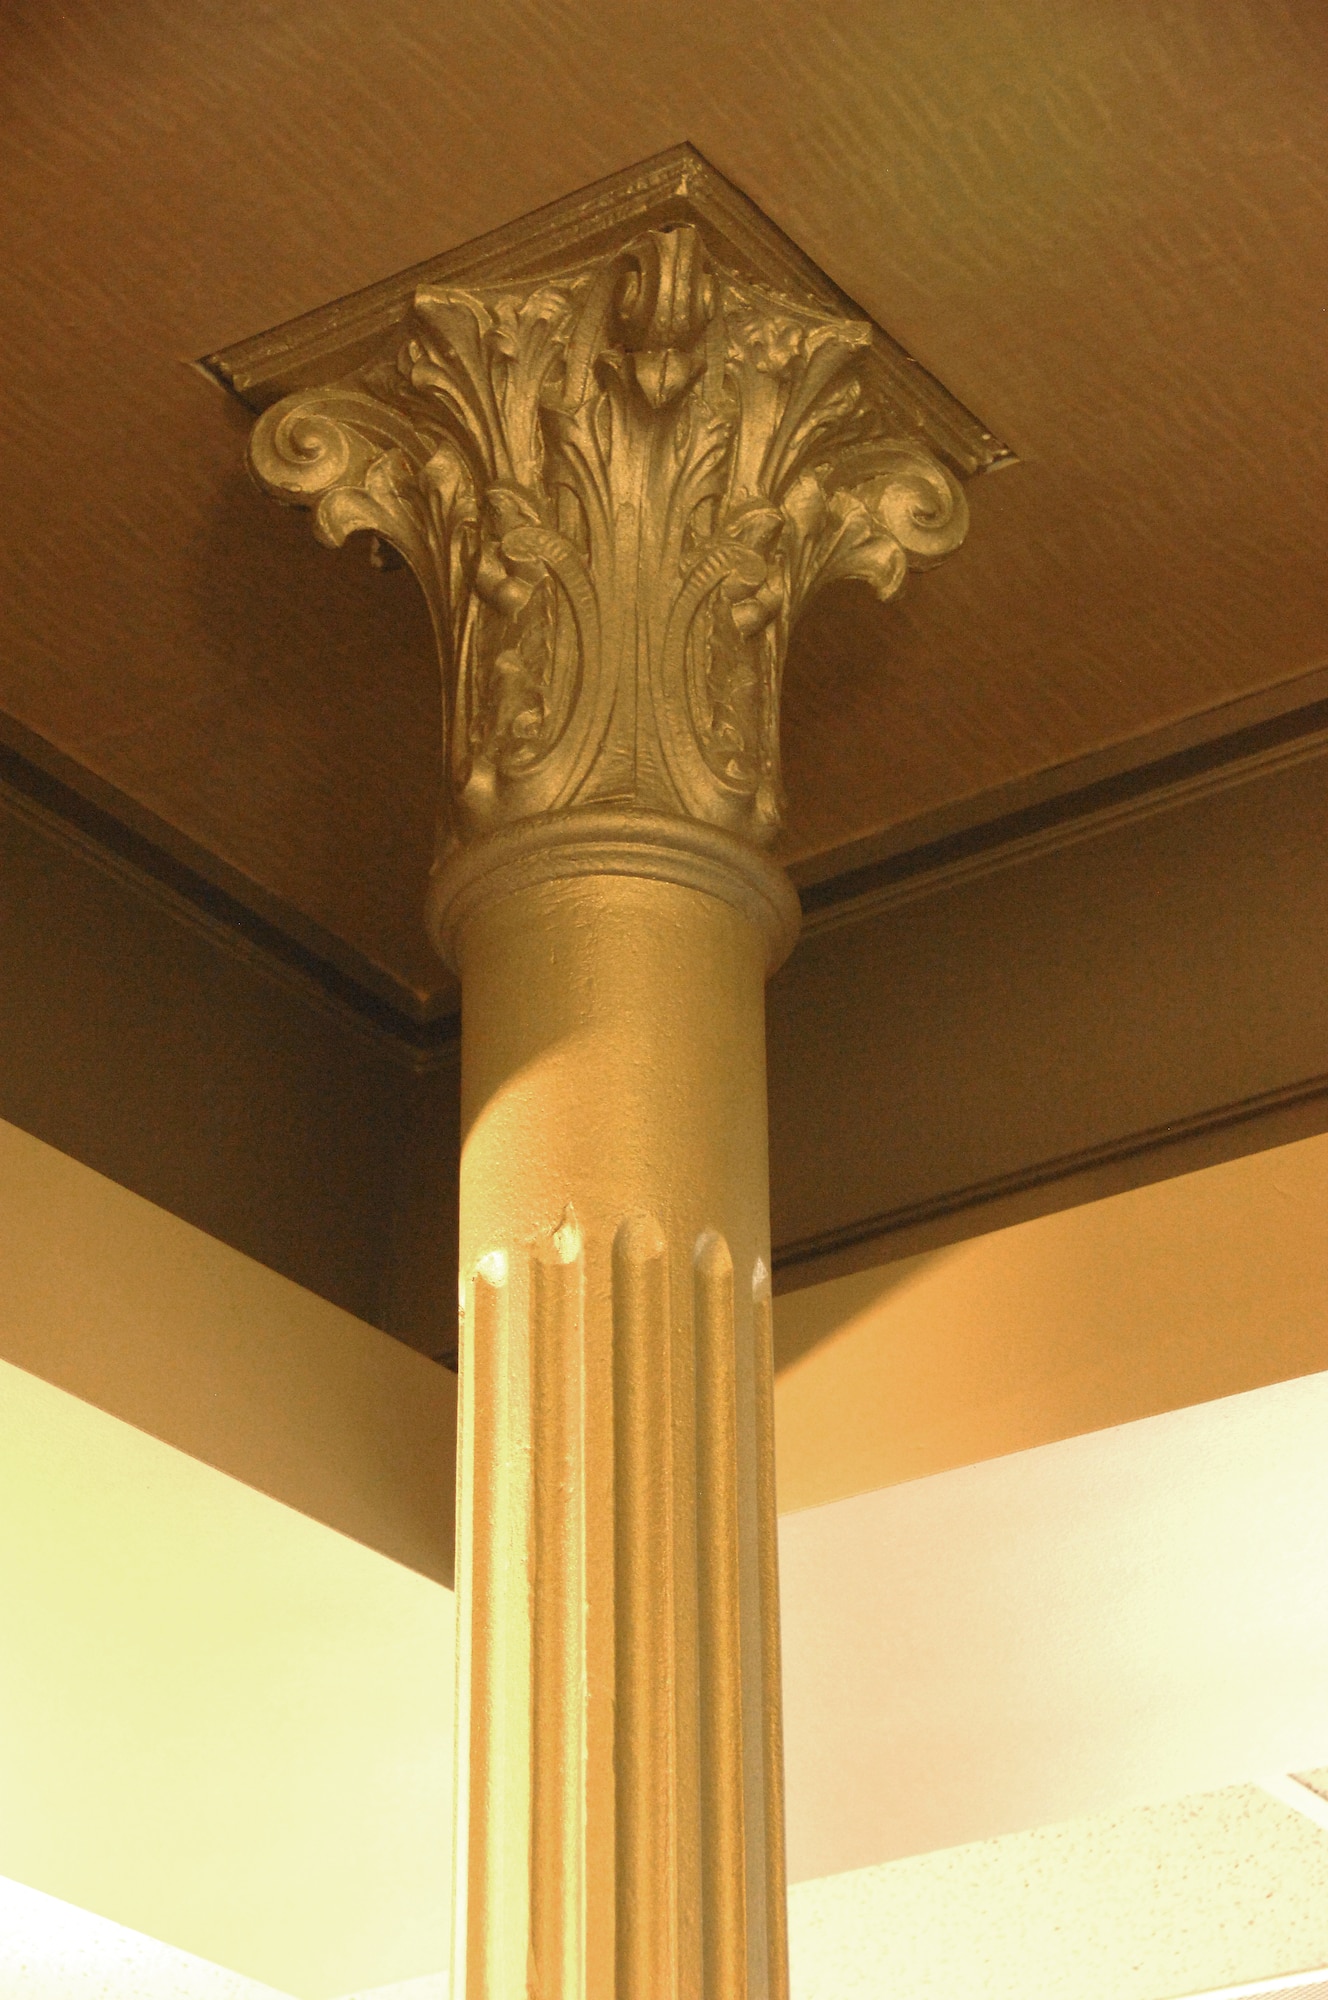 Cast iron columns such as this are located throughout Building 49 and were refinished as part of the plan to preserve the character of the building, which was built in 1894. The building is receiving $5 million in renovations that are scheduled for completion later this summer. The updates will provide 32,000 square feet of office space for the 55th Mission Support Group and 55th Force Support Squadron. (U.S. Air Force photo/Delanie Stafford)